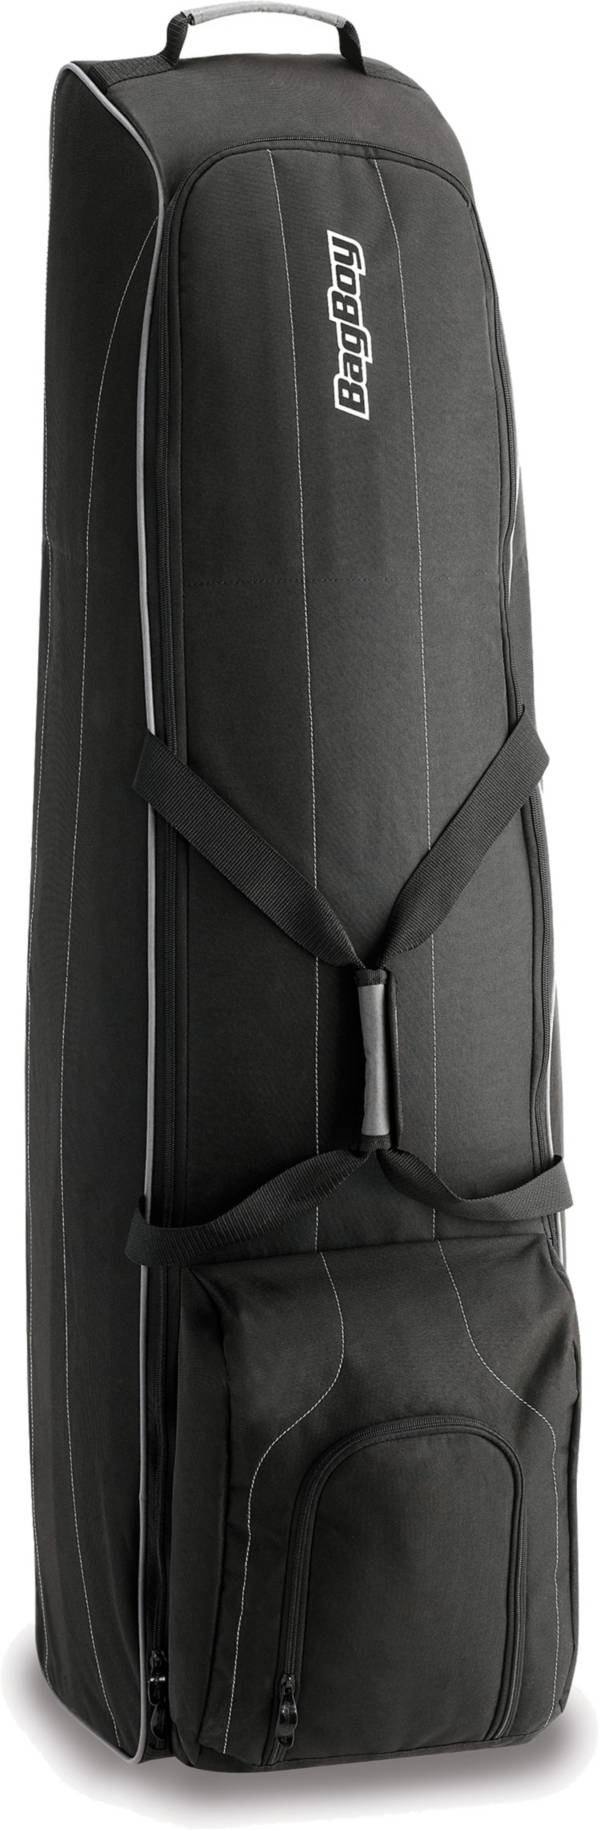 Bag Boy T-460 Travel Cover product image